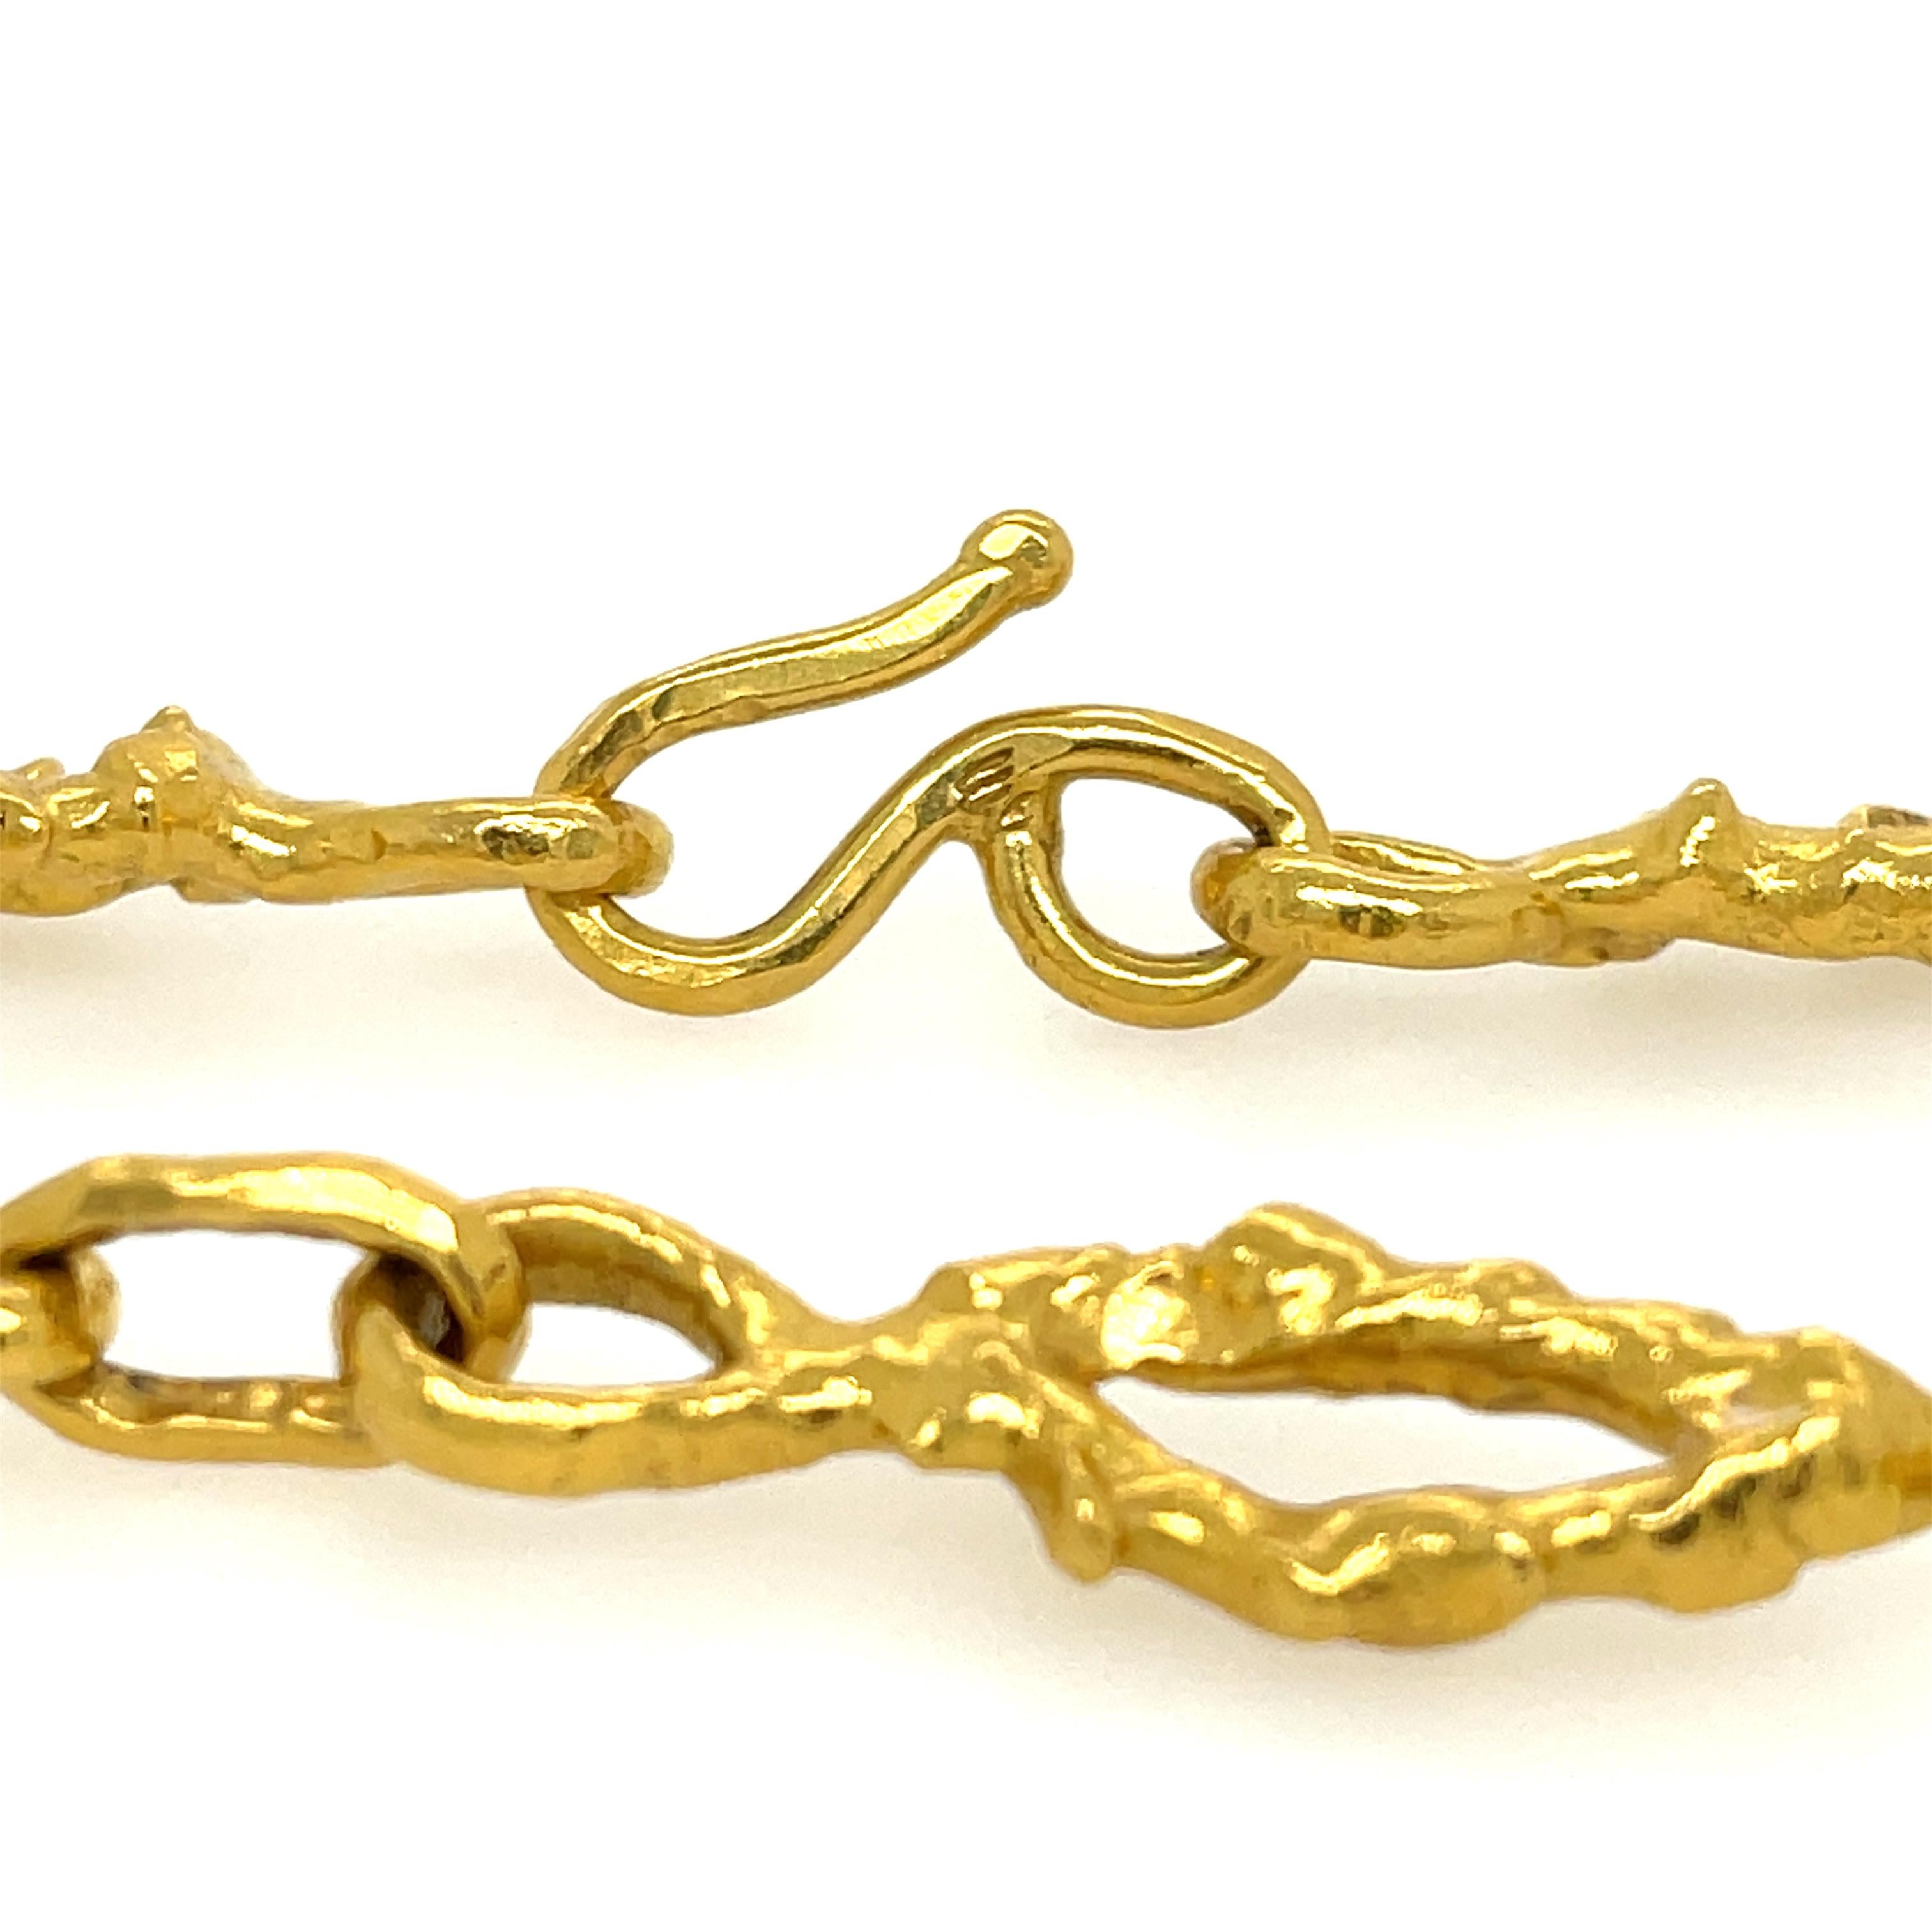 Estate Jean Mahie Freeform Link Necklace in 22K Yellow Gold.
 33